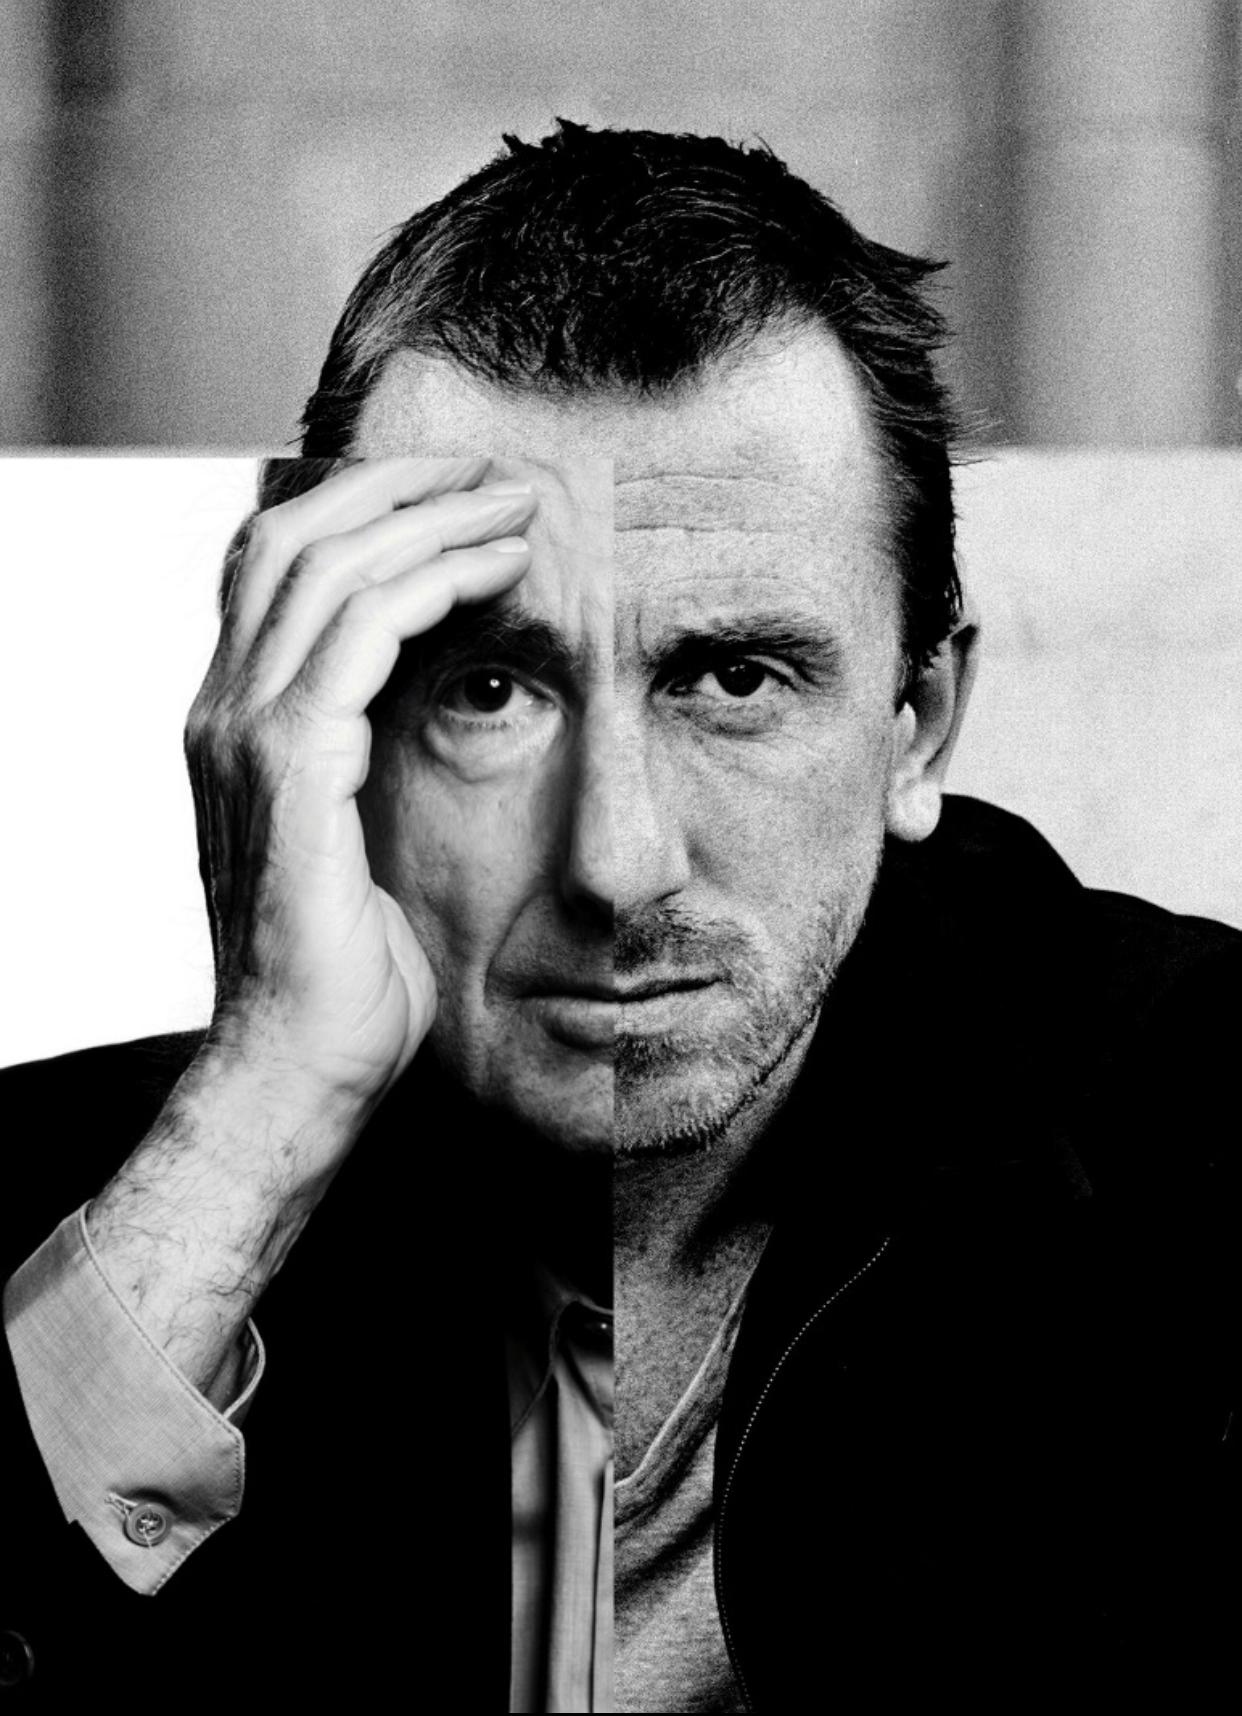 Gisela Faure Black and White Photograph - Tim Roth + Philip Roth, Contemporary Art, Photography, 21st Century